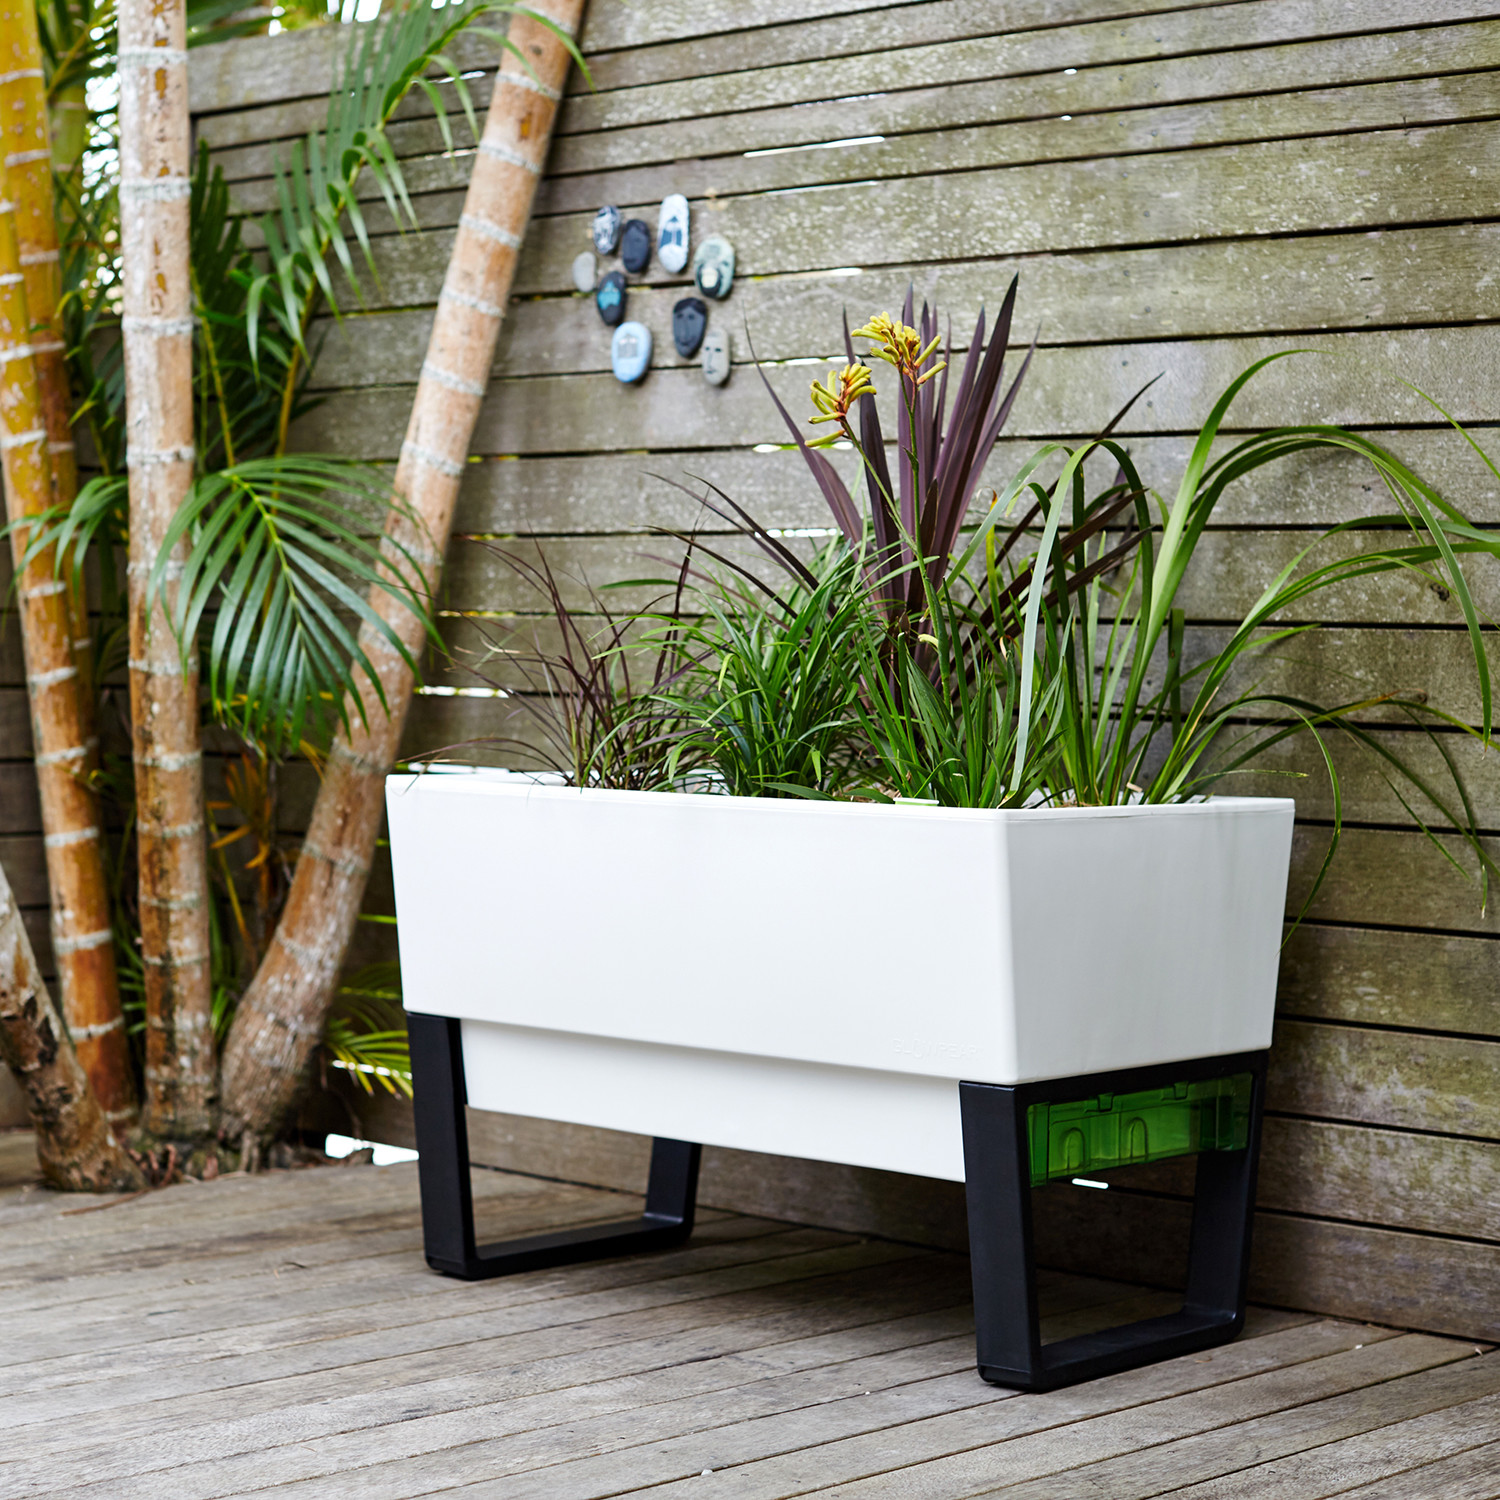 Modern Balcony Planters: The Space Savvy Solution for Small Gardens